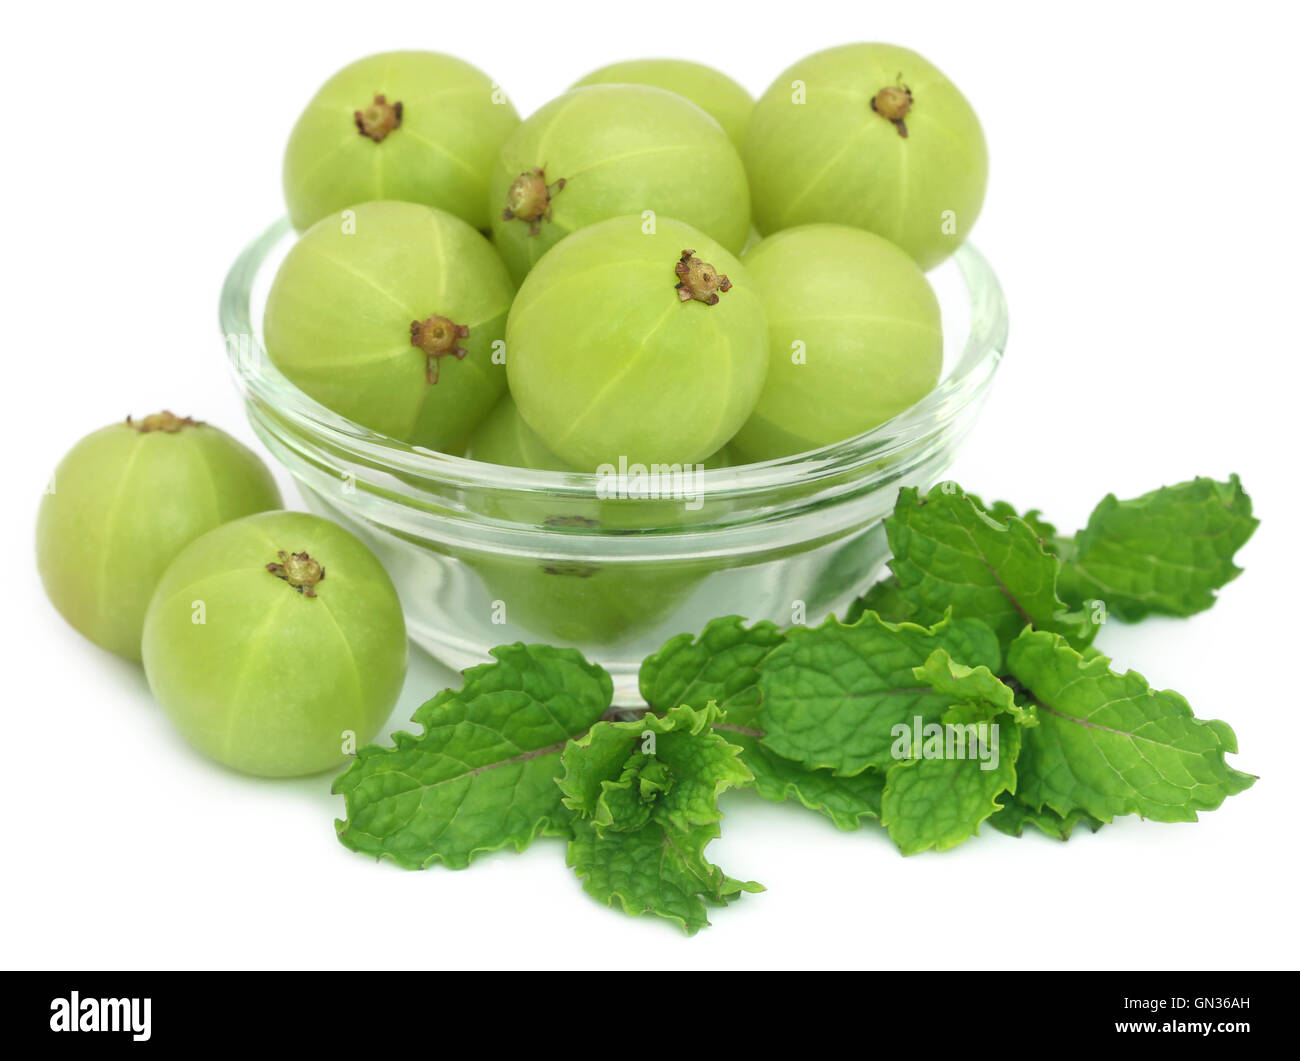 Amla fruits with mint leaves over white background Stock Photo